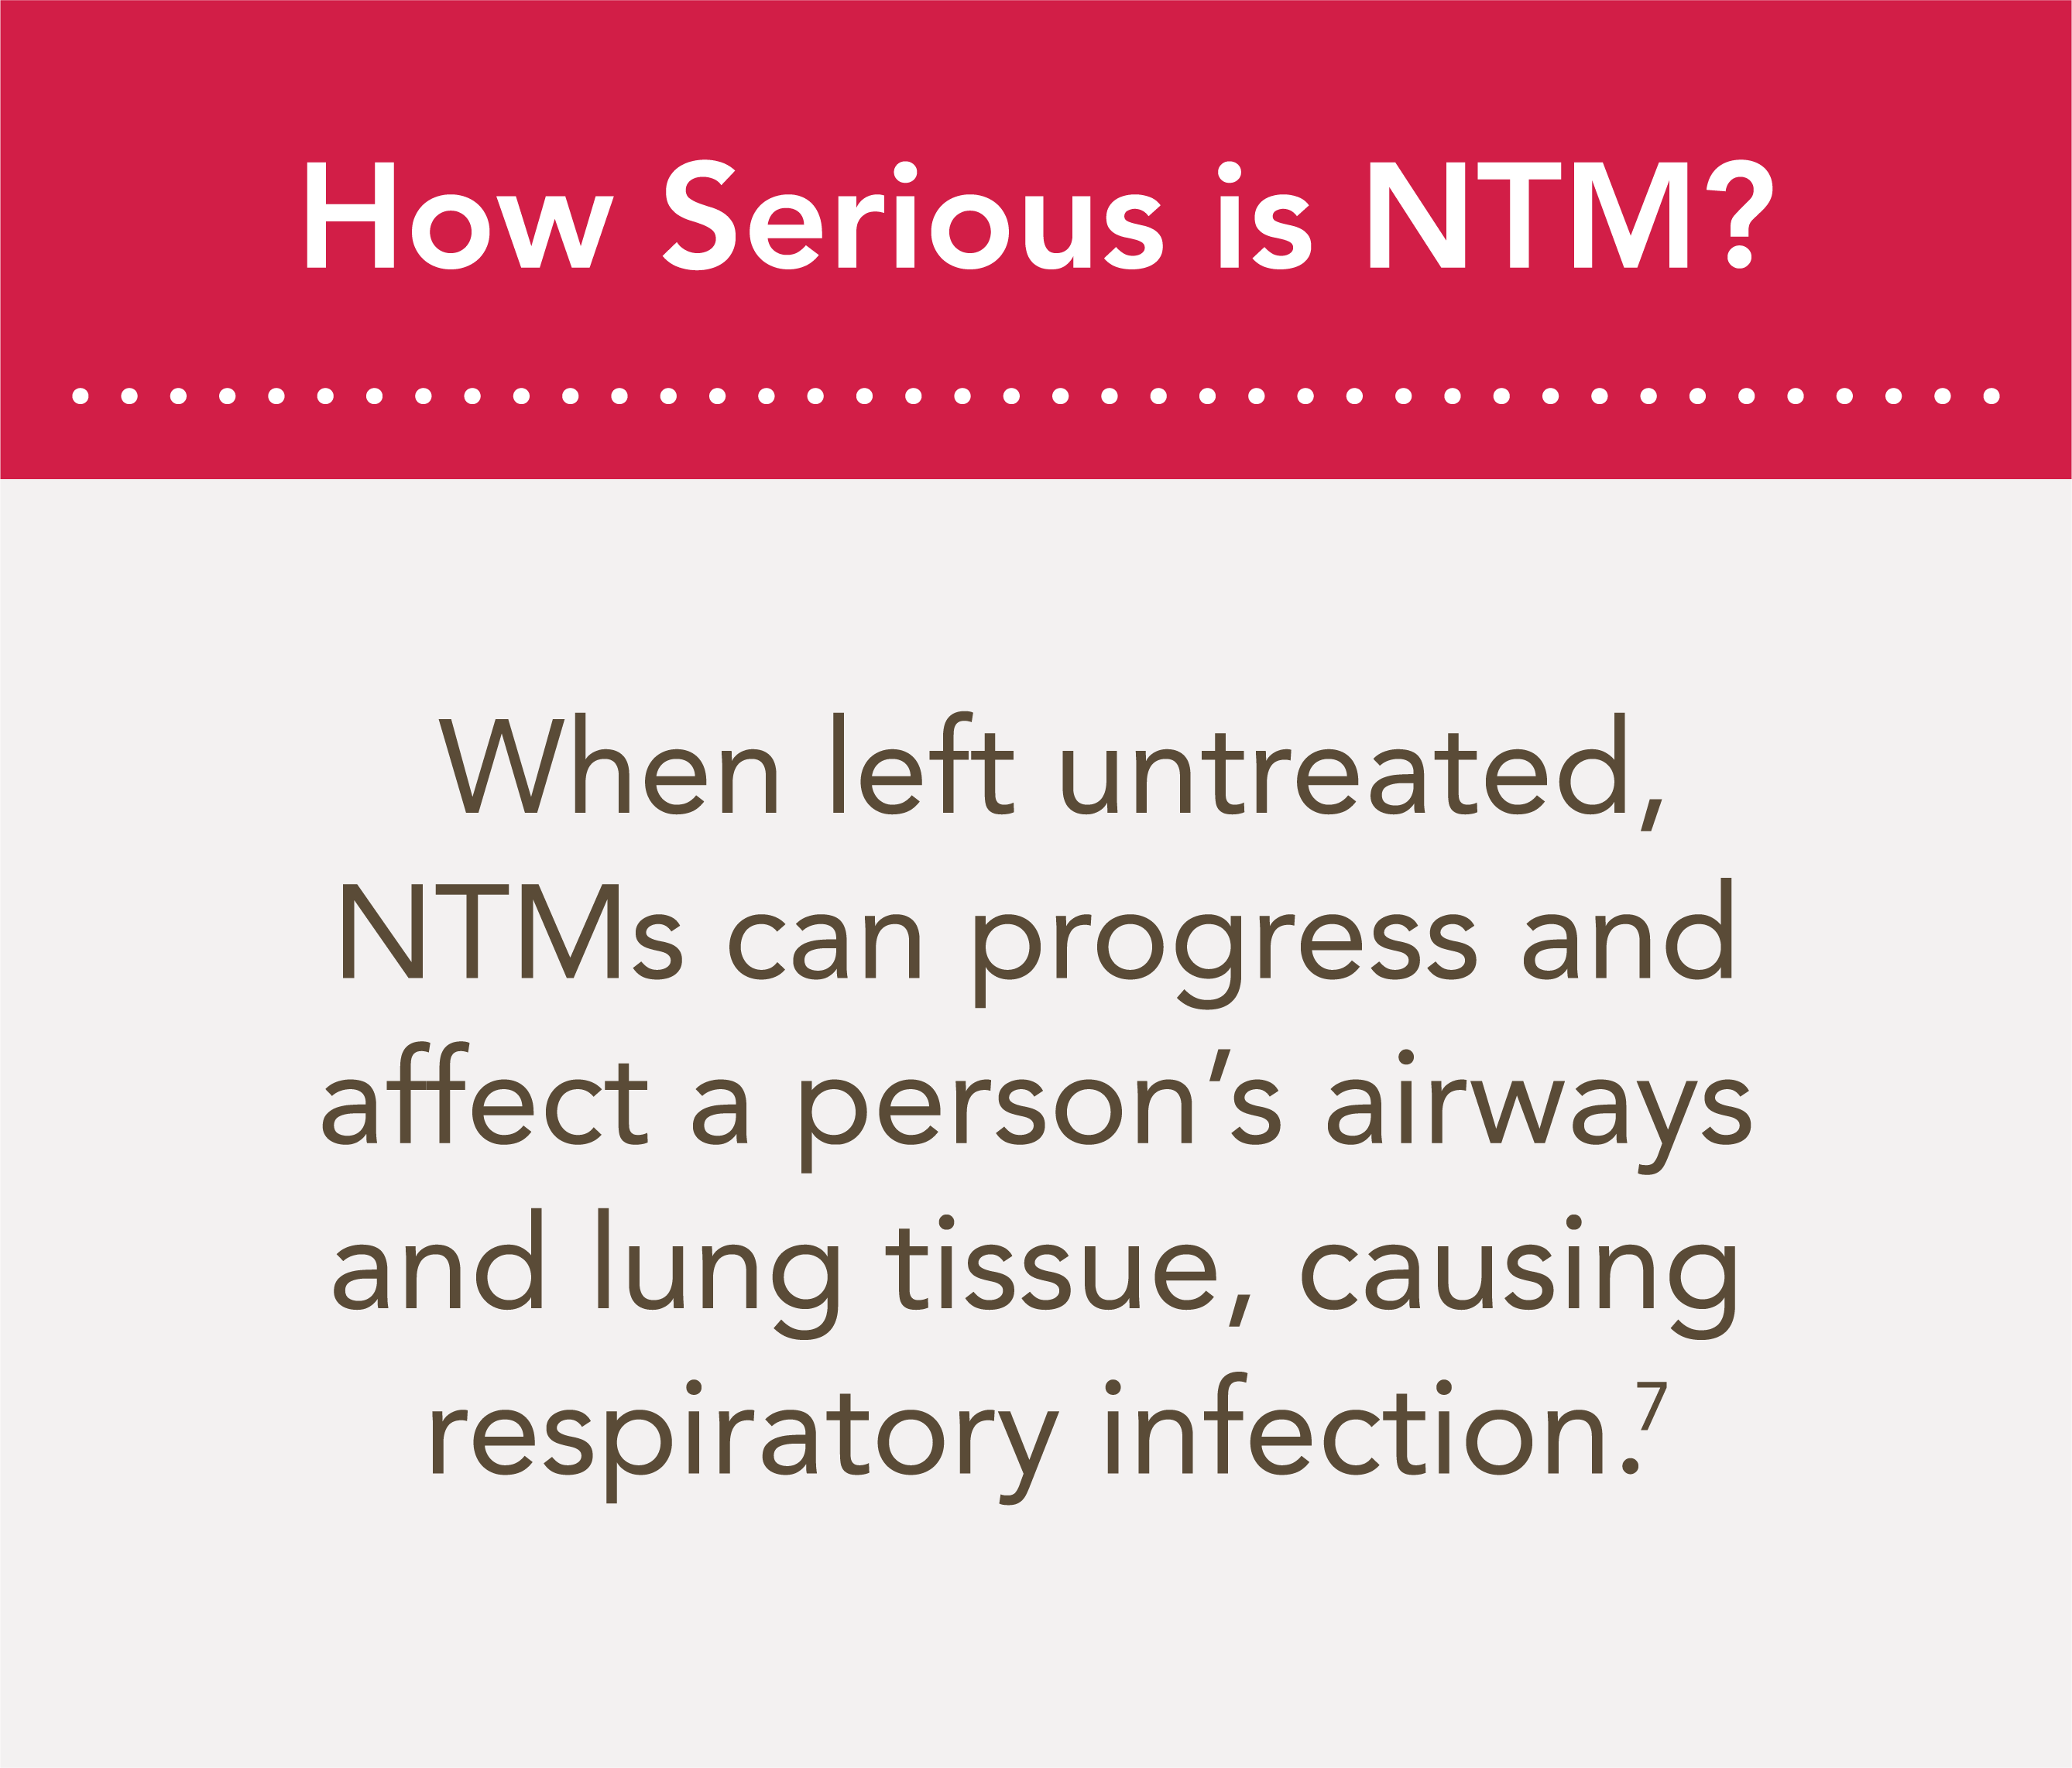 NTM Info & Research - The symptoms and severity of nontuberculous